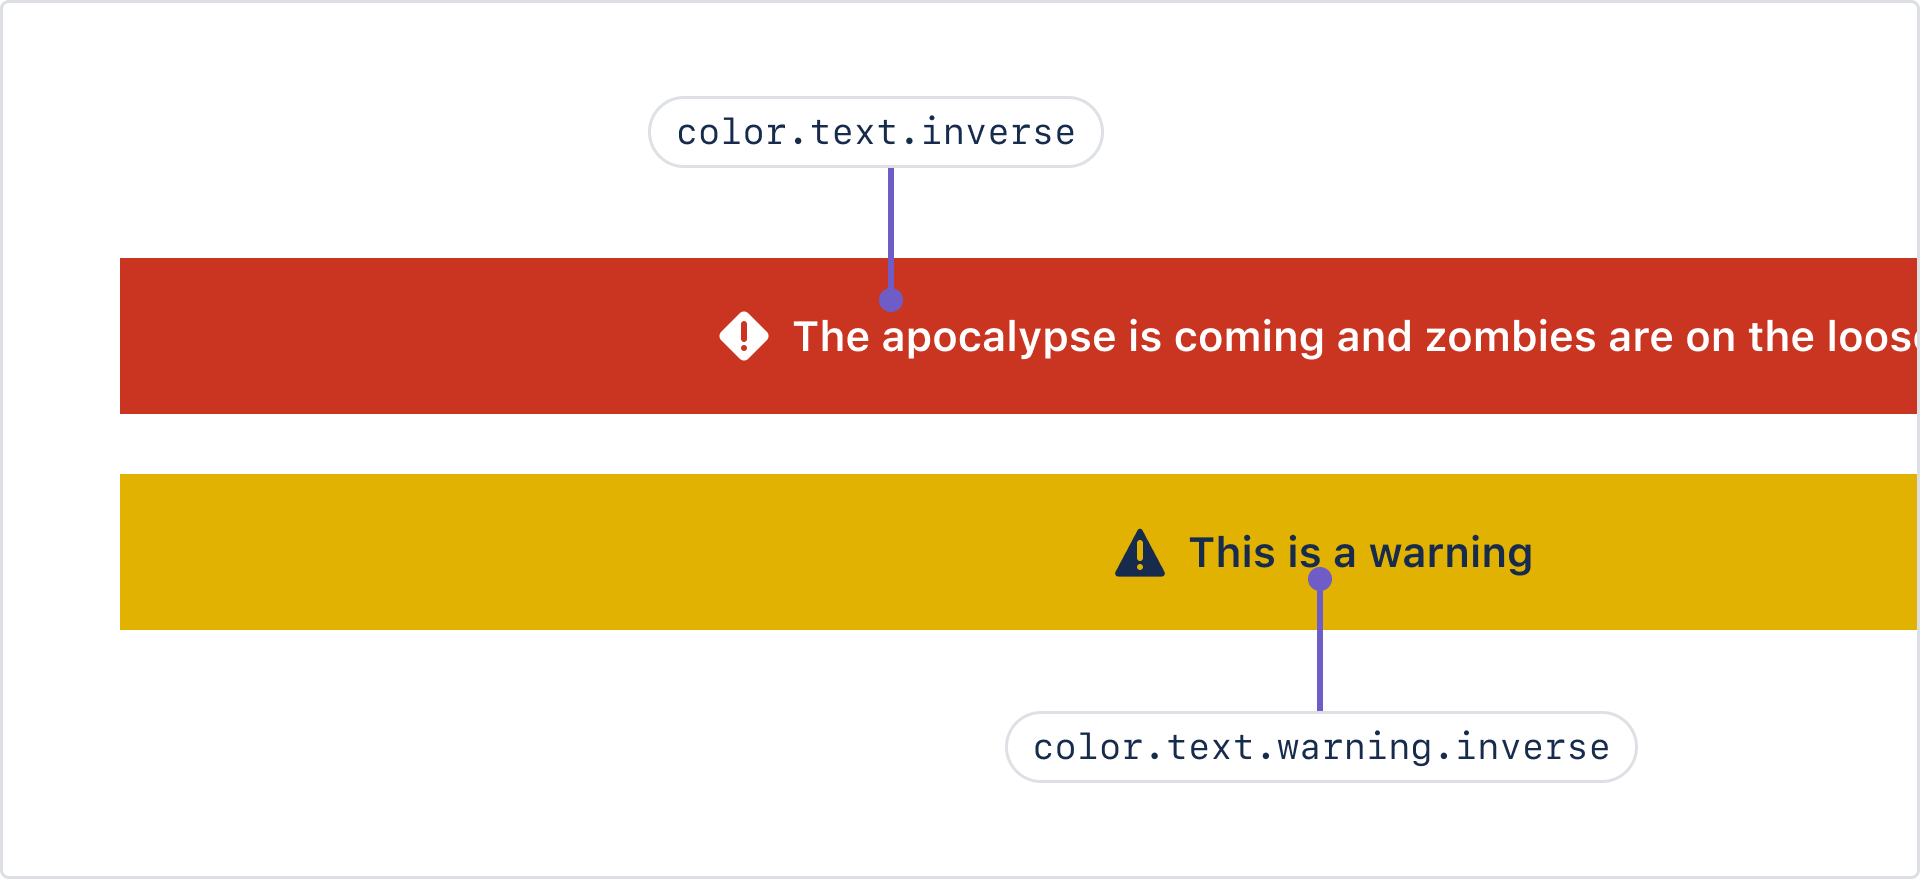 A danger banner and warning banner with text. The danger banner text is using “color.text.inverse”, and the warning banner text is using “color.text.warning.inverse.”